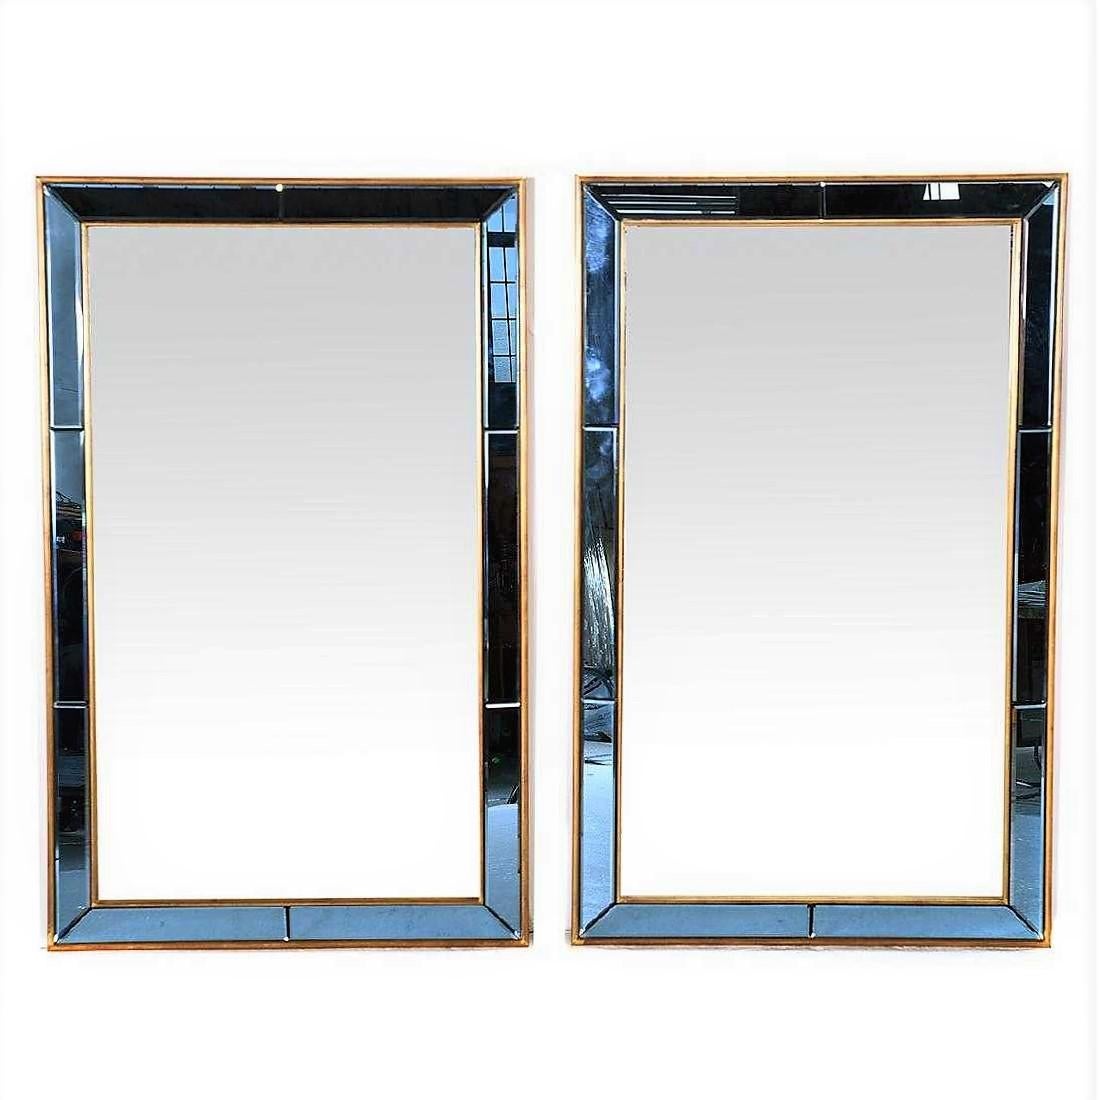 French Pair of Neoclassical Styled Mirrors with Beveled Blue Mirror Surround Panes